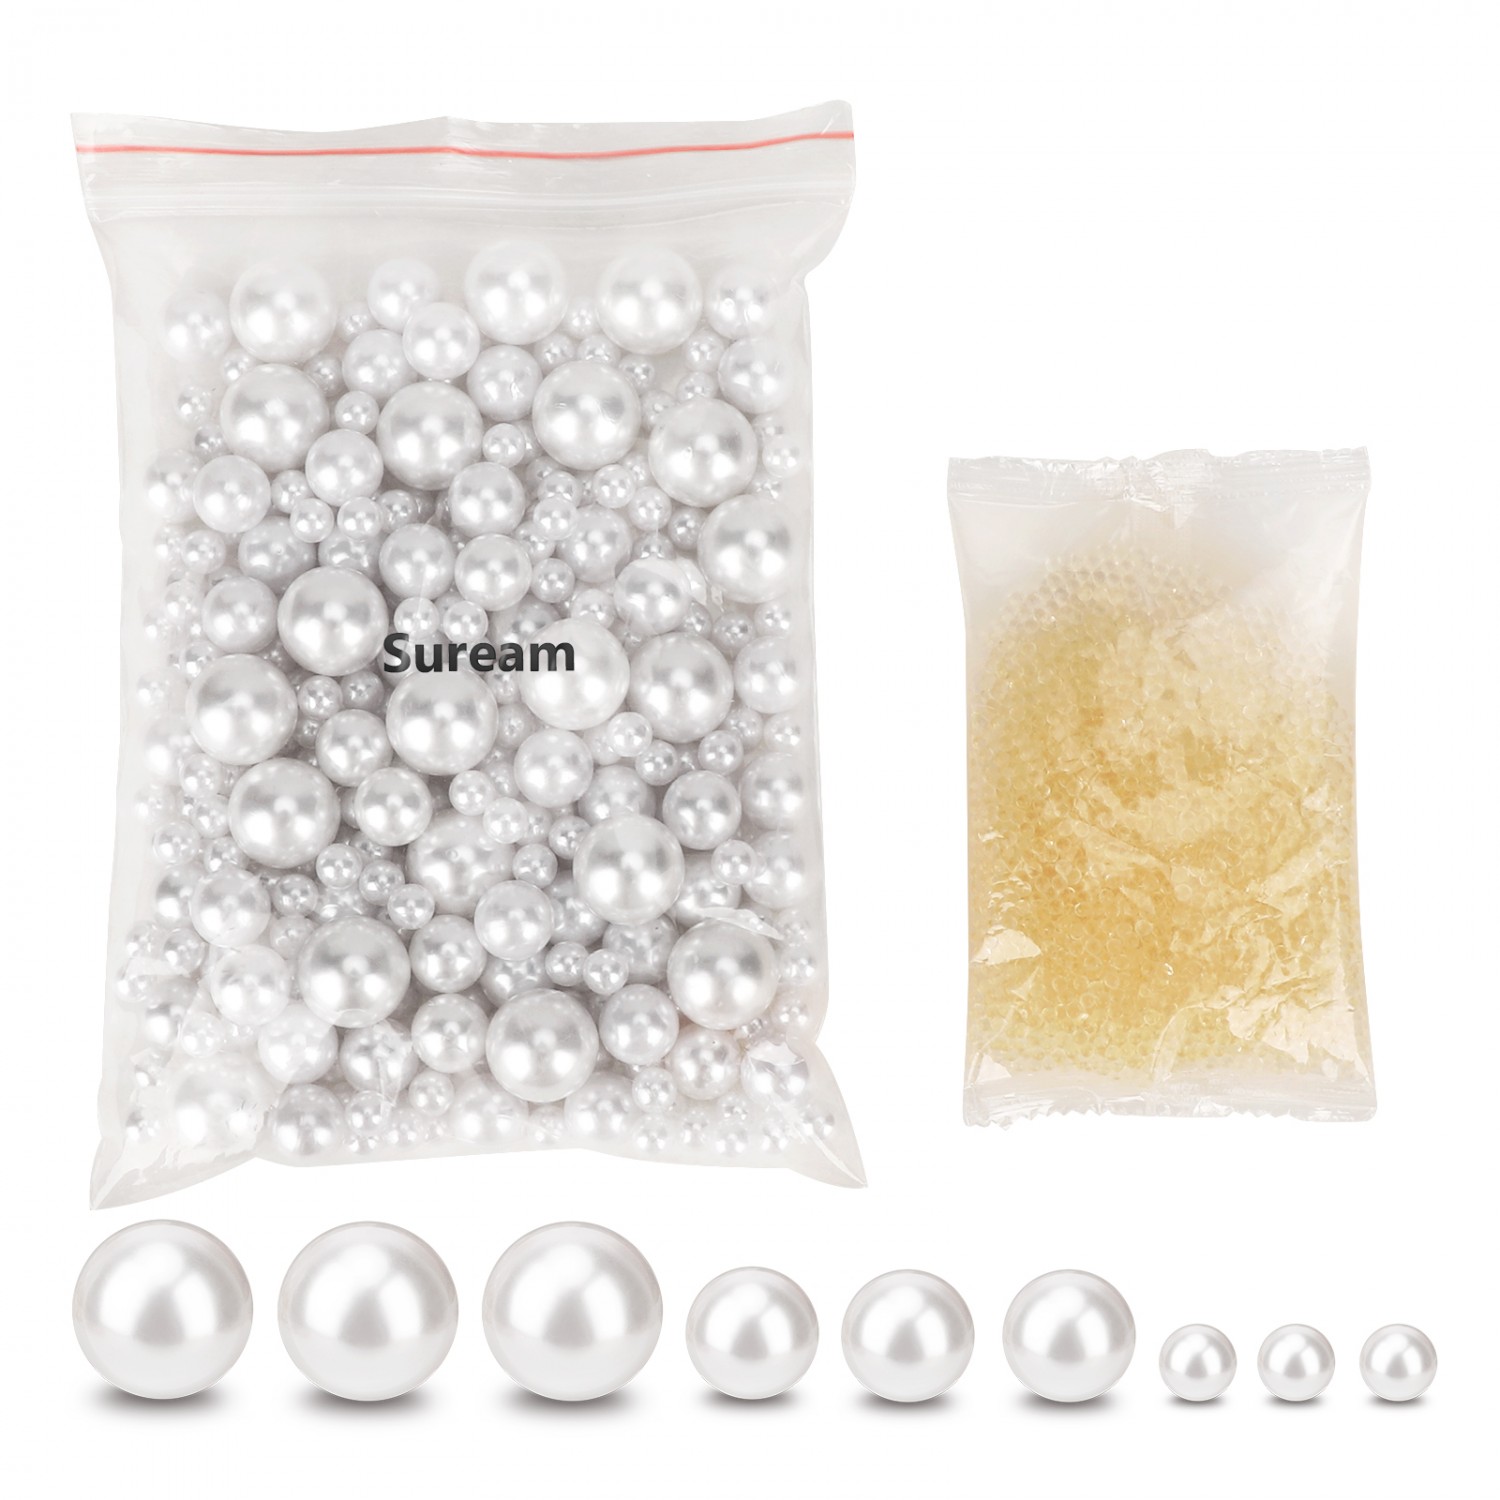 SUREAM No Hole Floating Pearls for Vase, 250PCS Artificial Beads